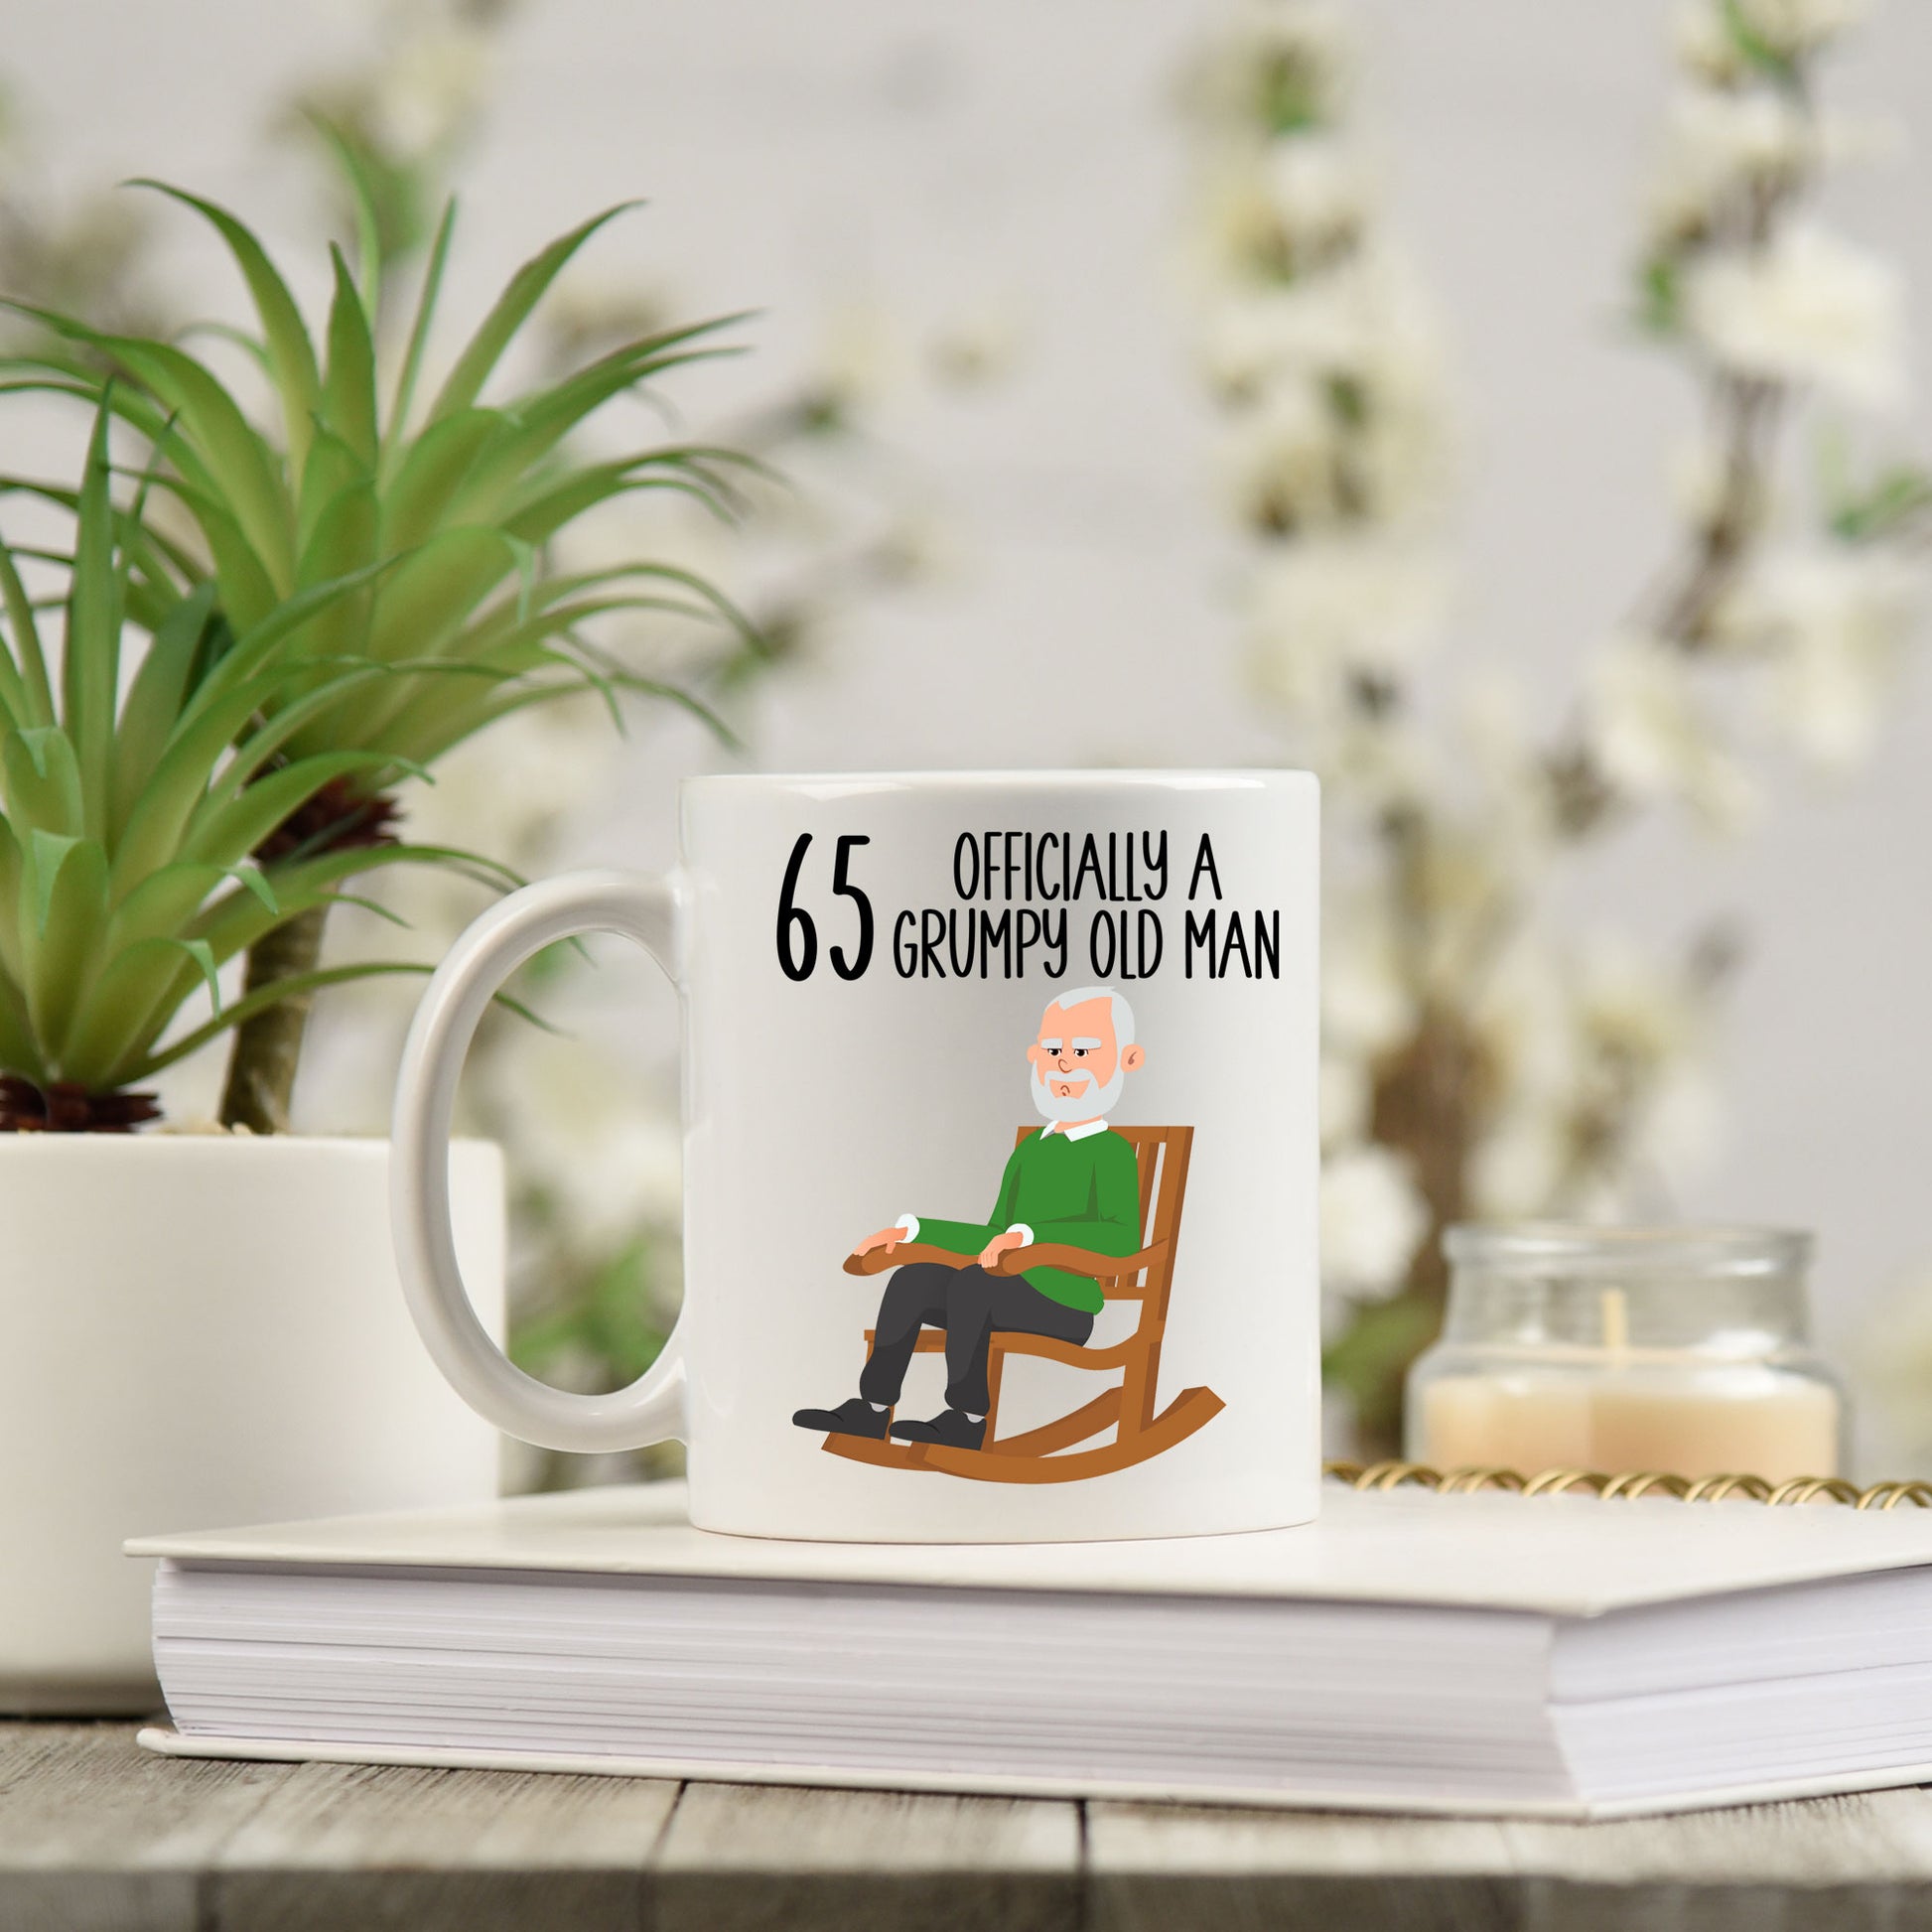 65 Officially A Grumpy Old Man Mug and/or Coaster Gift  - Always Looking Good - Mug On Its Own  